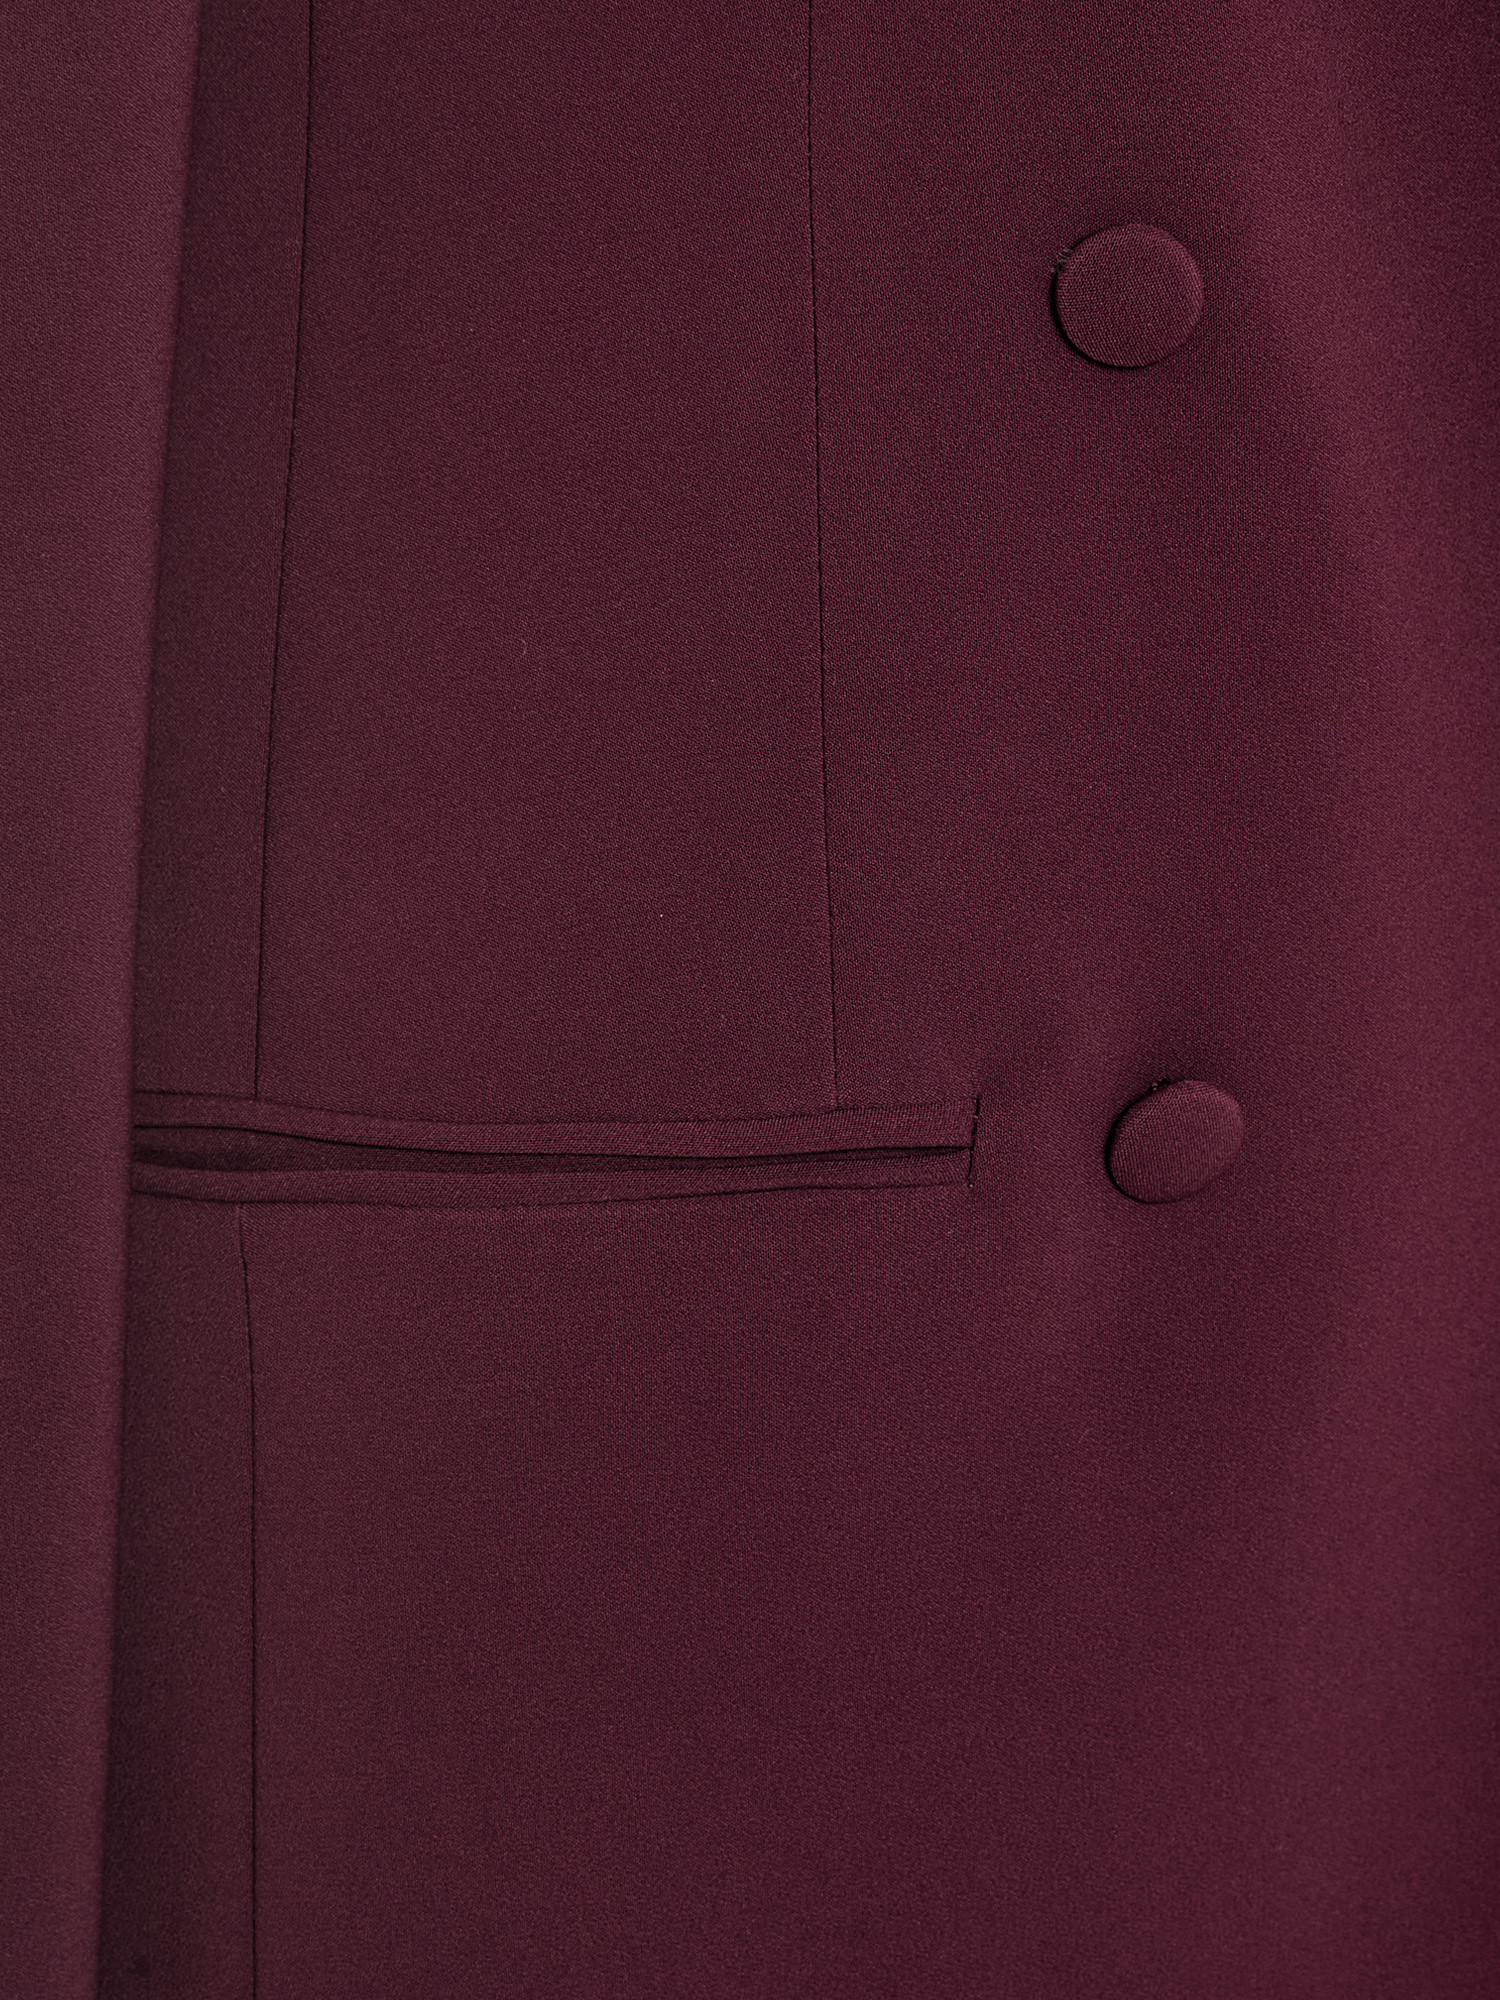 Koan - Double-breasted jacket, Red Bordeaux, large image number 2